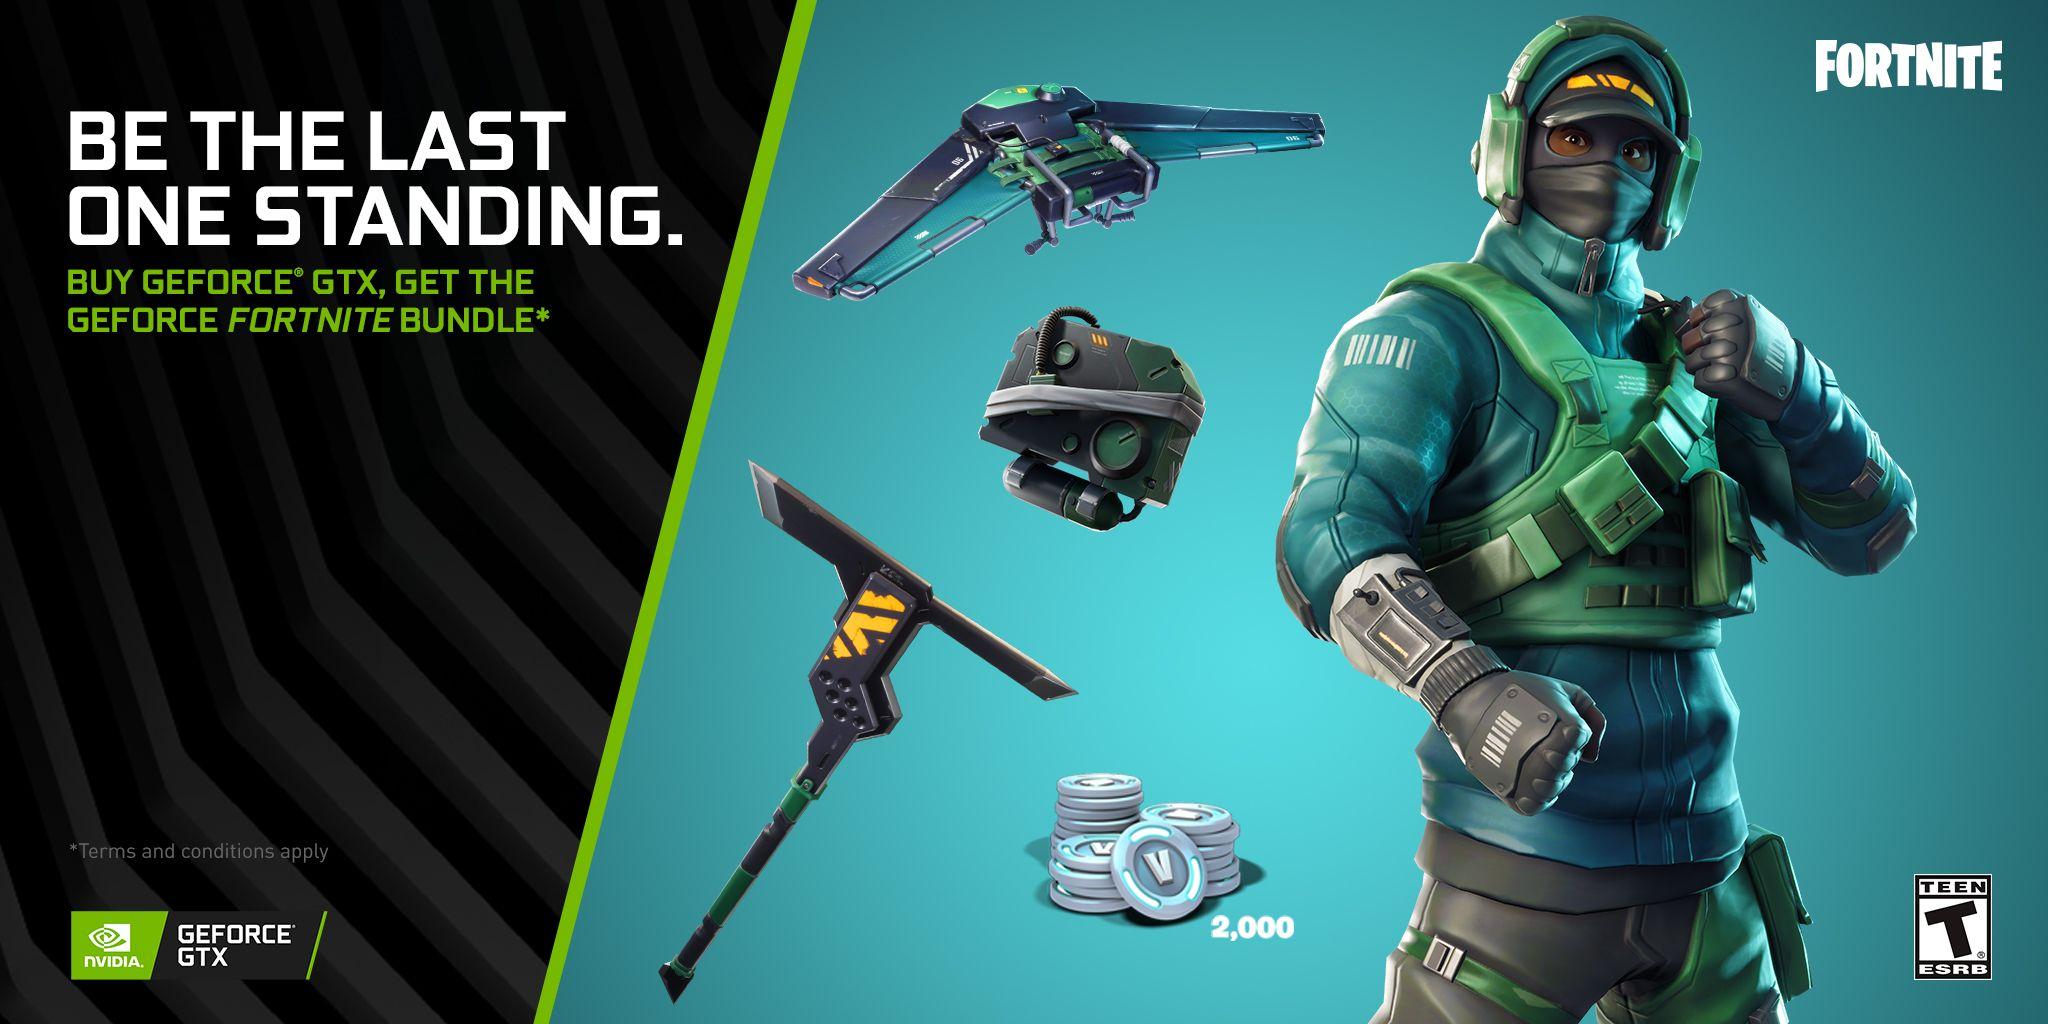 Just in time for the holidays and Fortnite’s Season 7, NVIDIA and